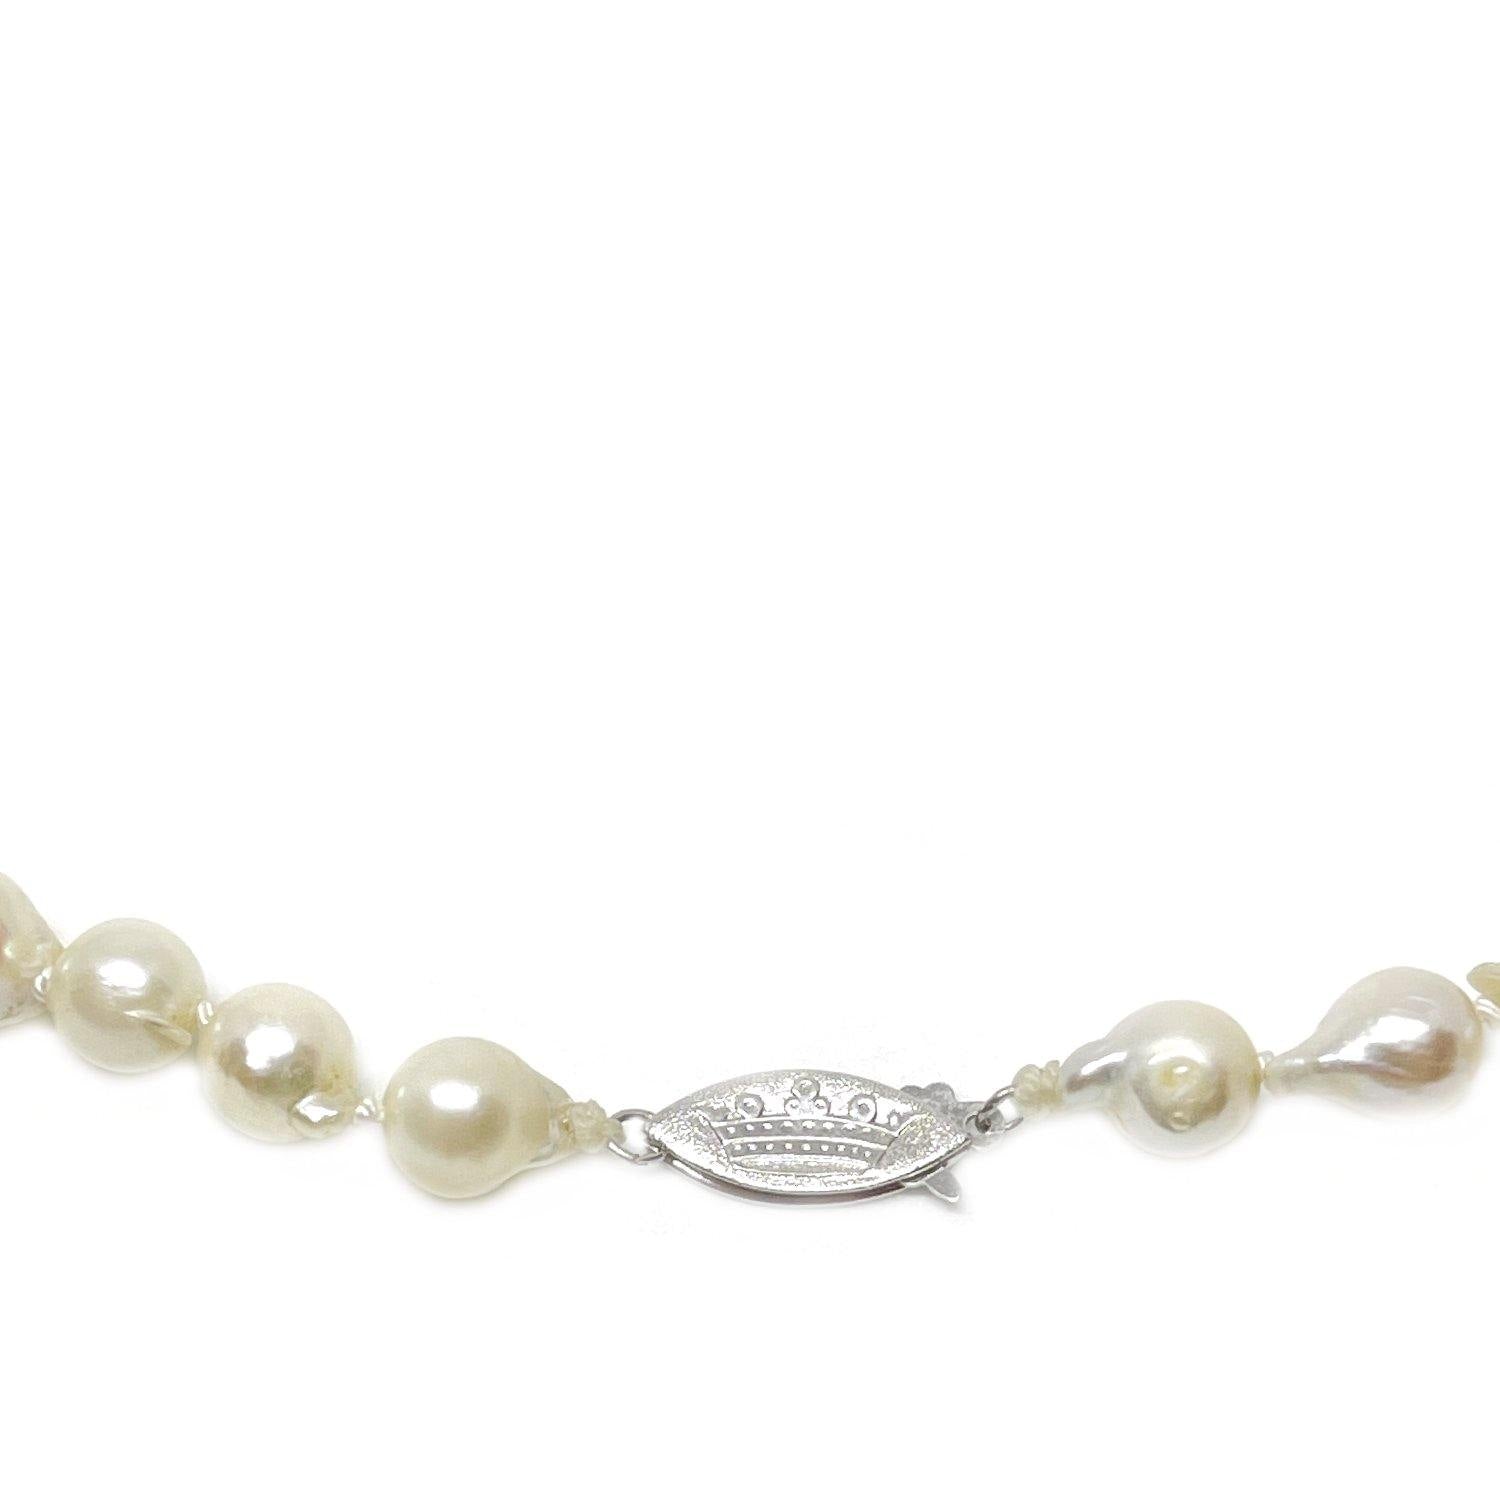 Baroque Crown Japanese Cultured Akoya Pearl Strand - 14K White Gold 30 Inch